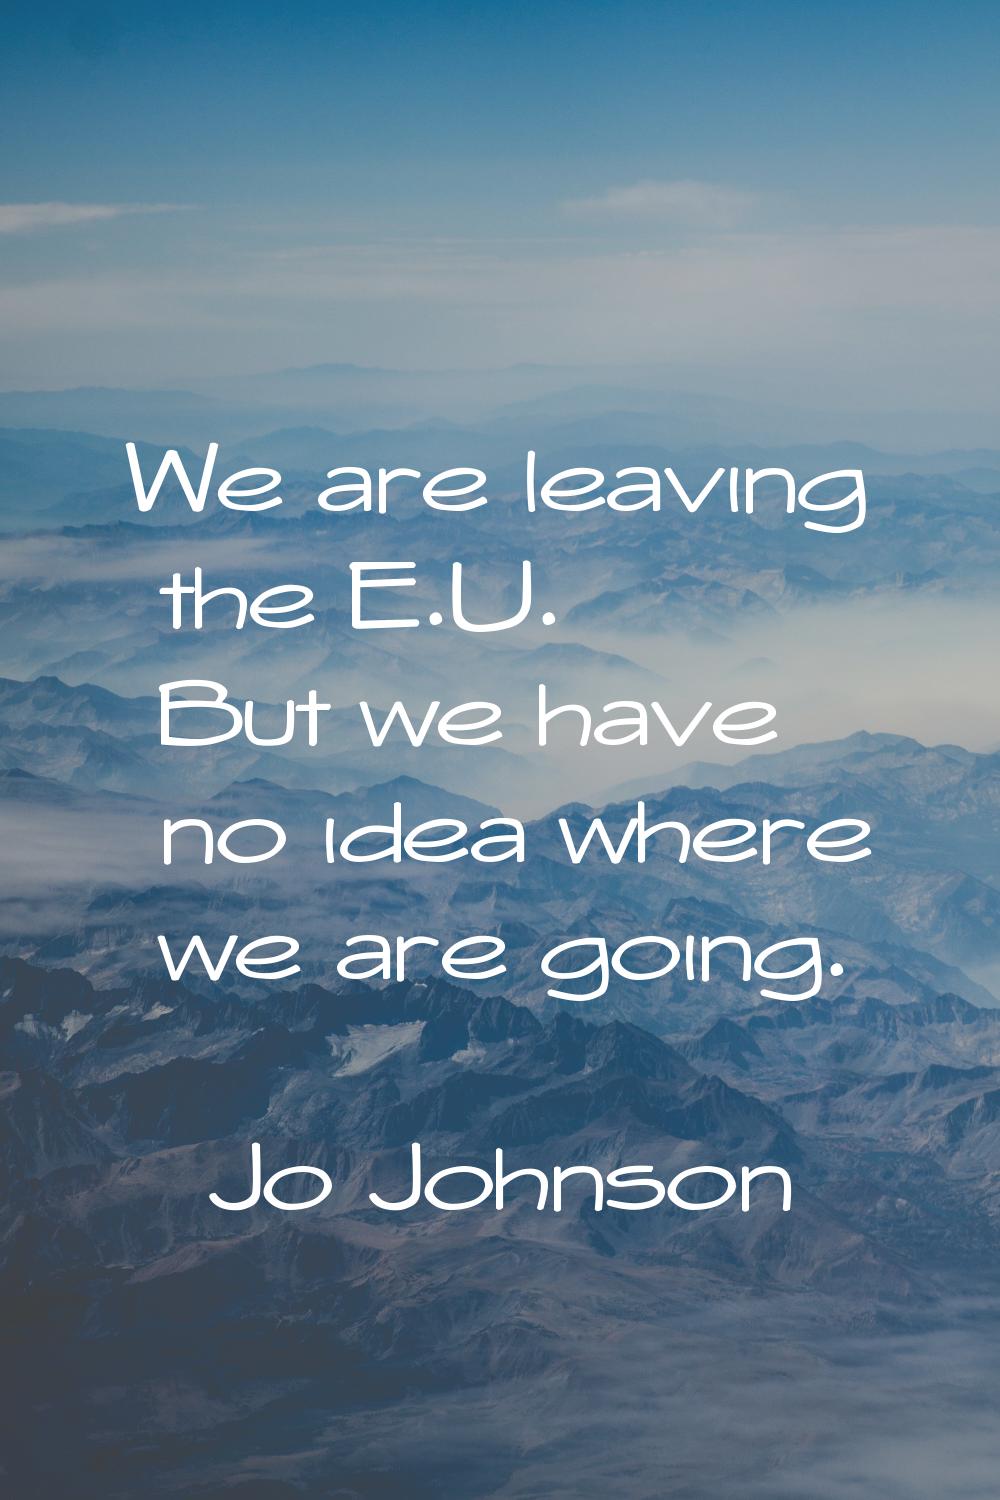 We are leaving the E.U. But we have no idea where we are going.